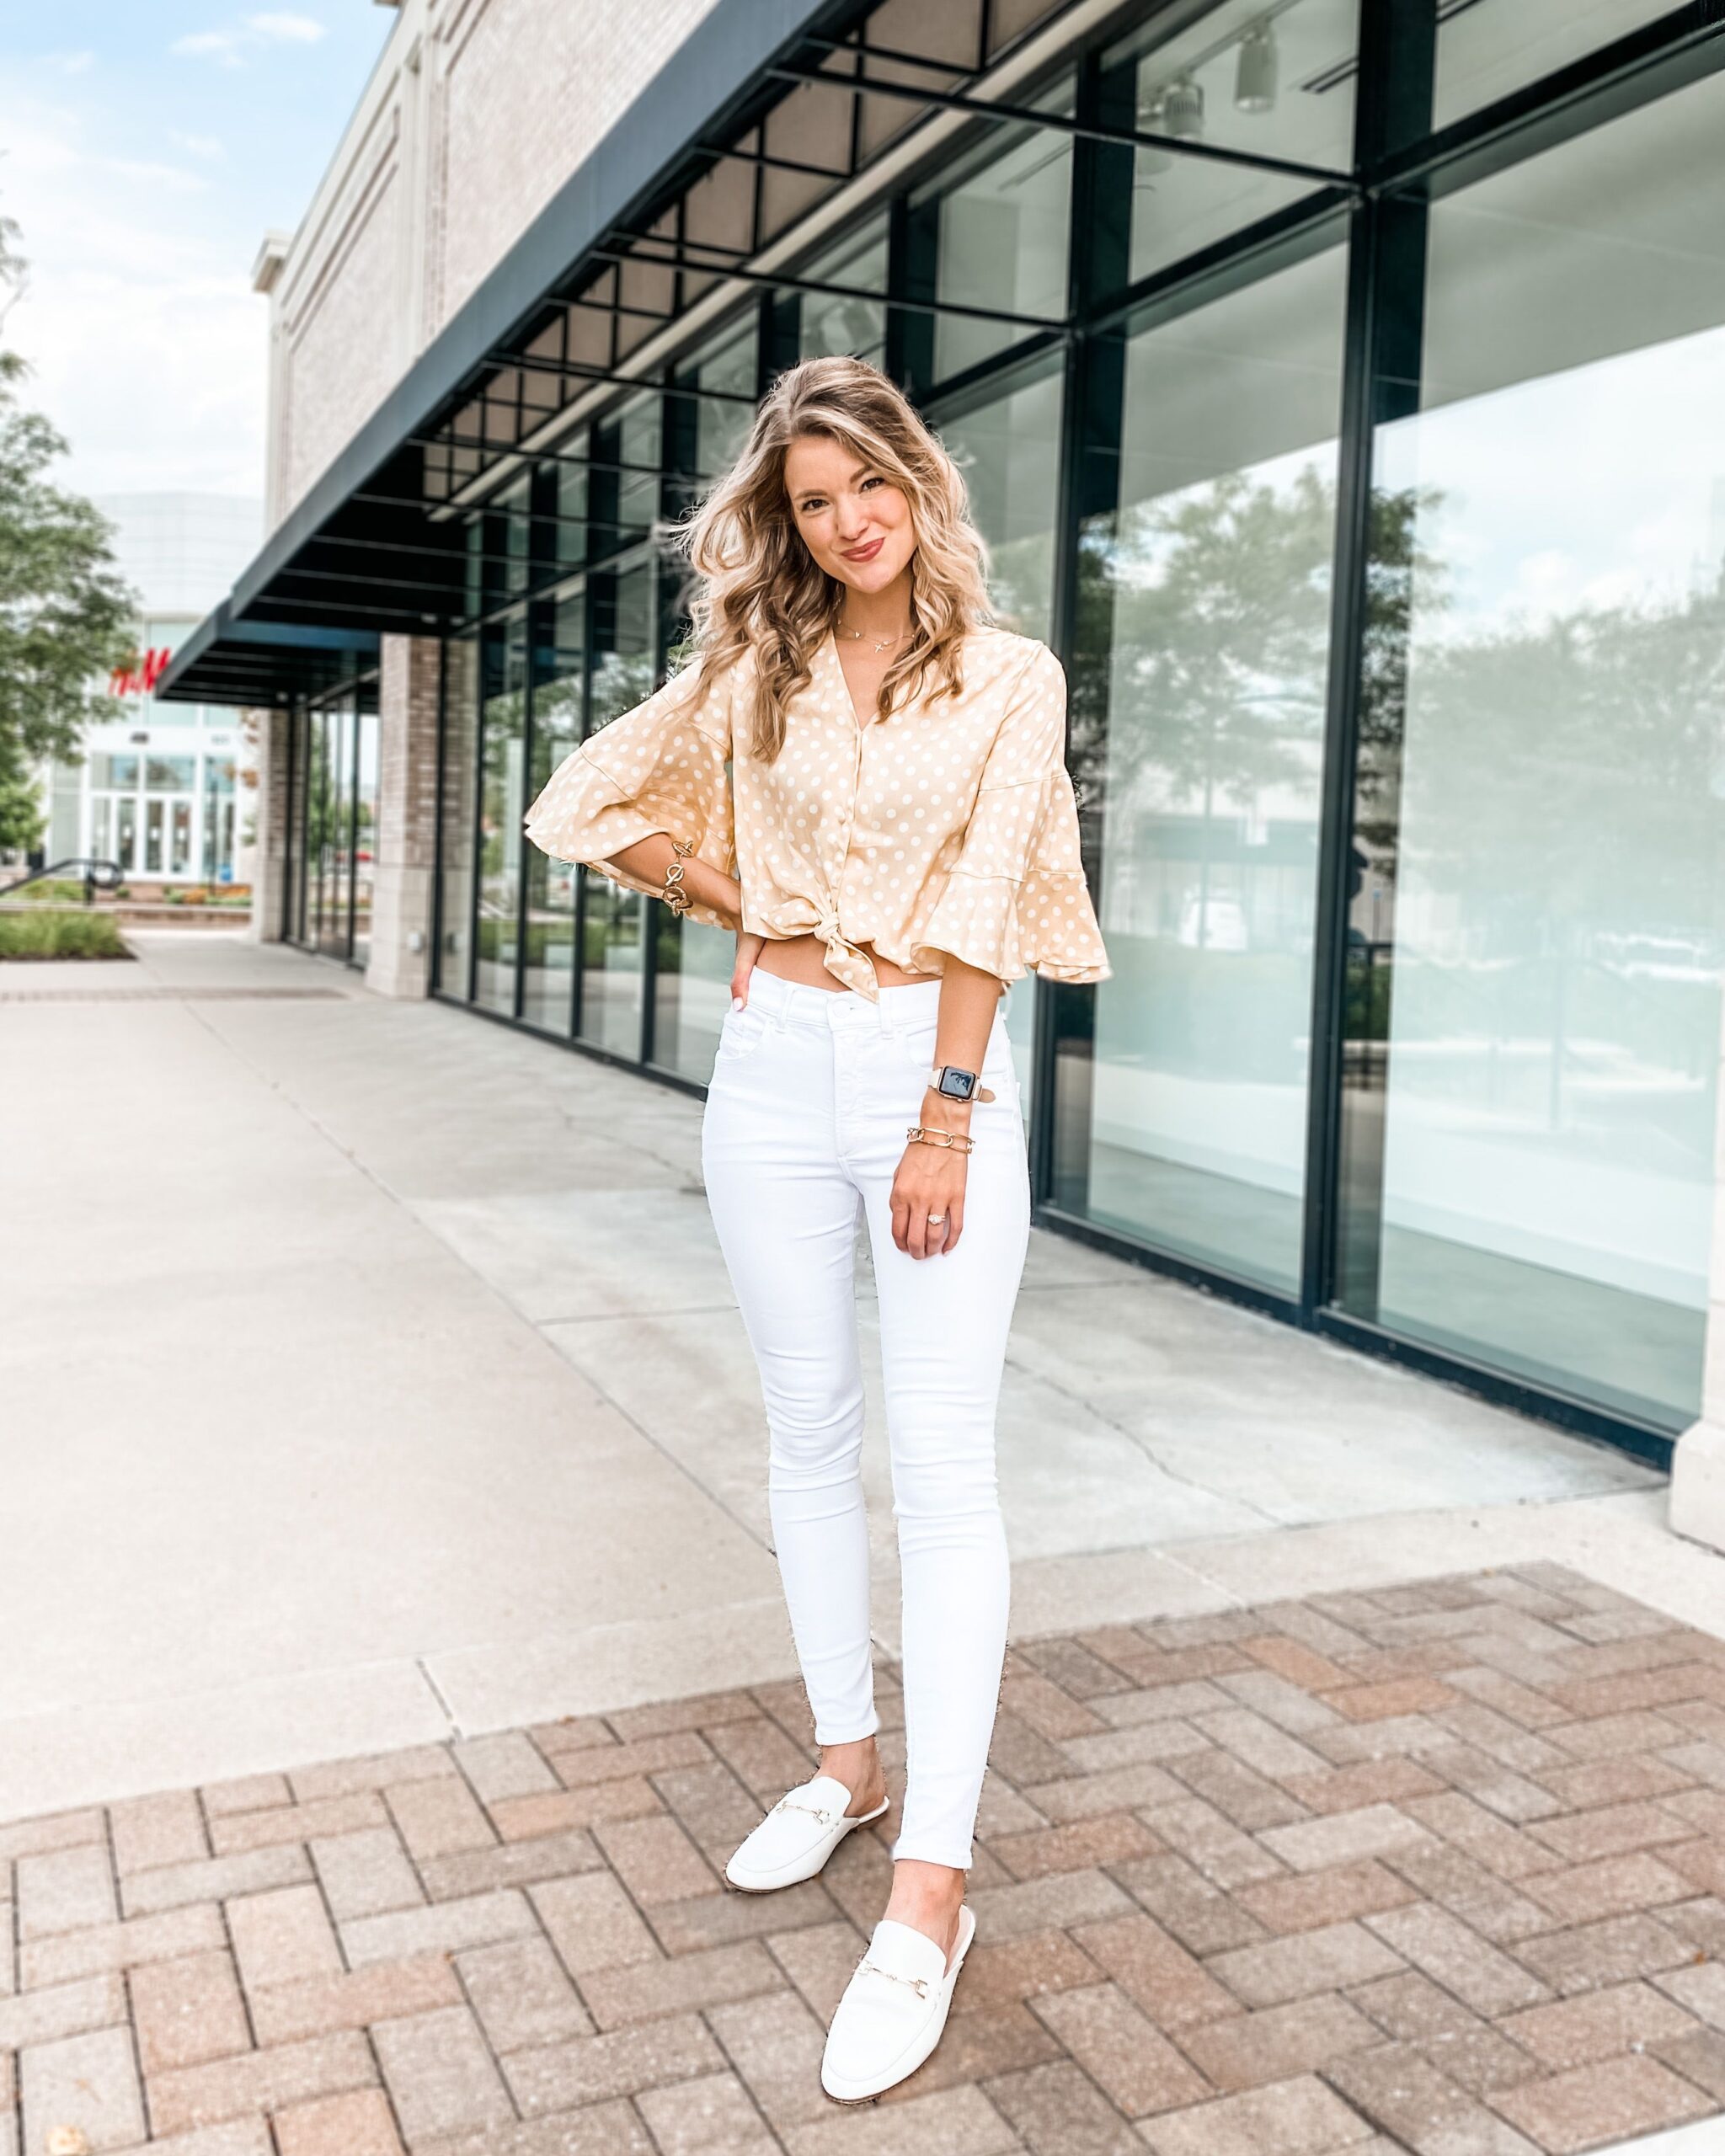 Flowy Tops Outfit Ideas